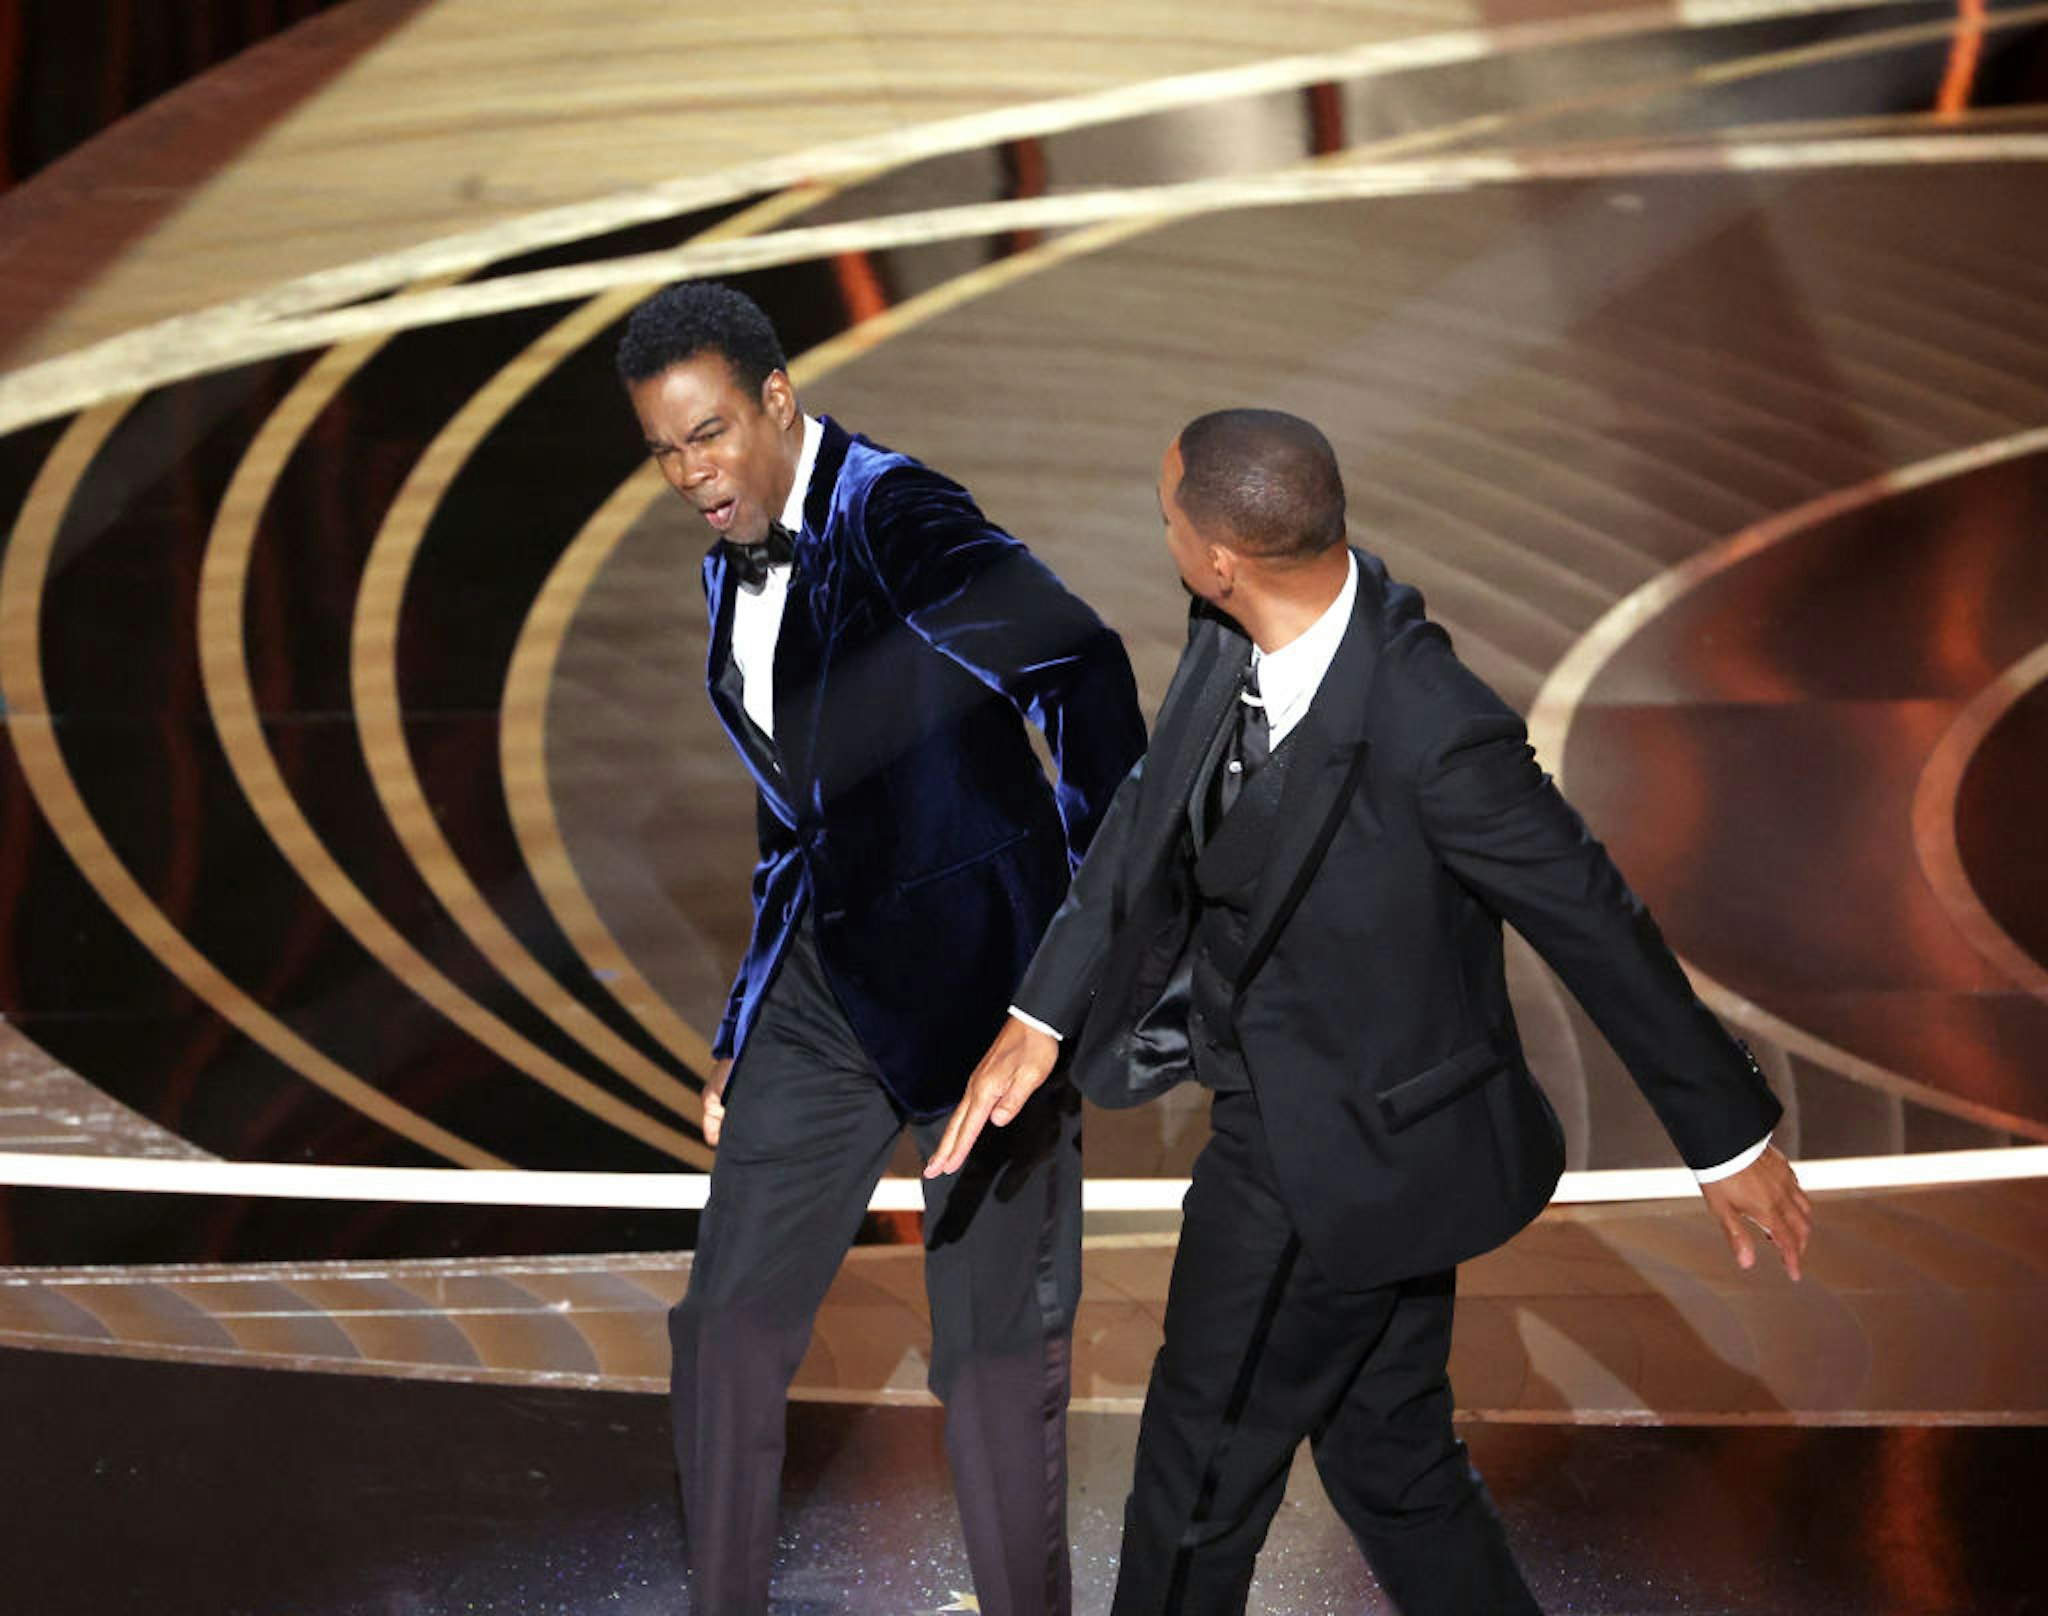 Chris Rock and Will Smith onstage during the show at the 94th Academy Awards at the Dolby Theatre at Ovation Hollywood on Sunday, March 27, 2022. (